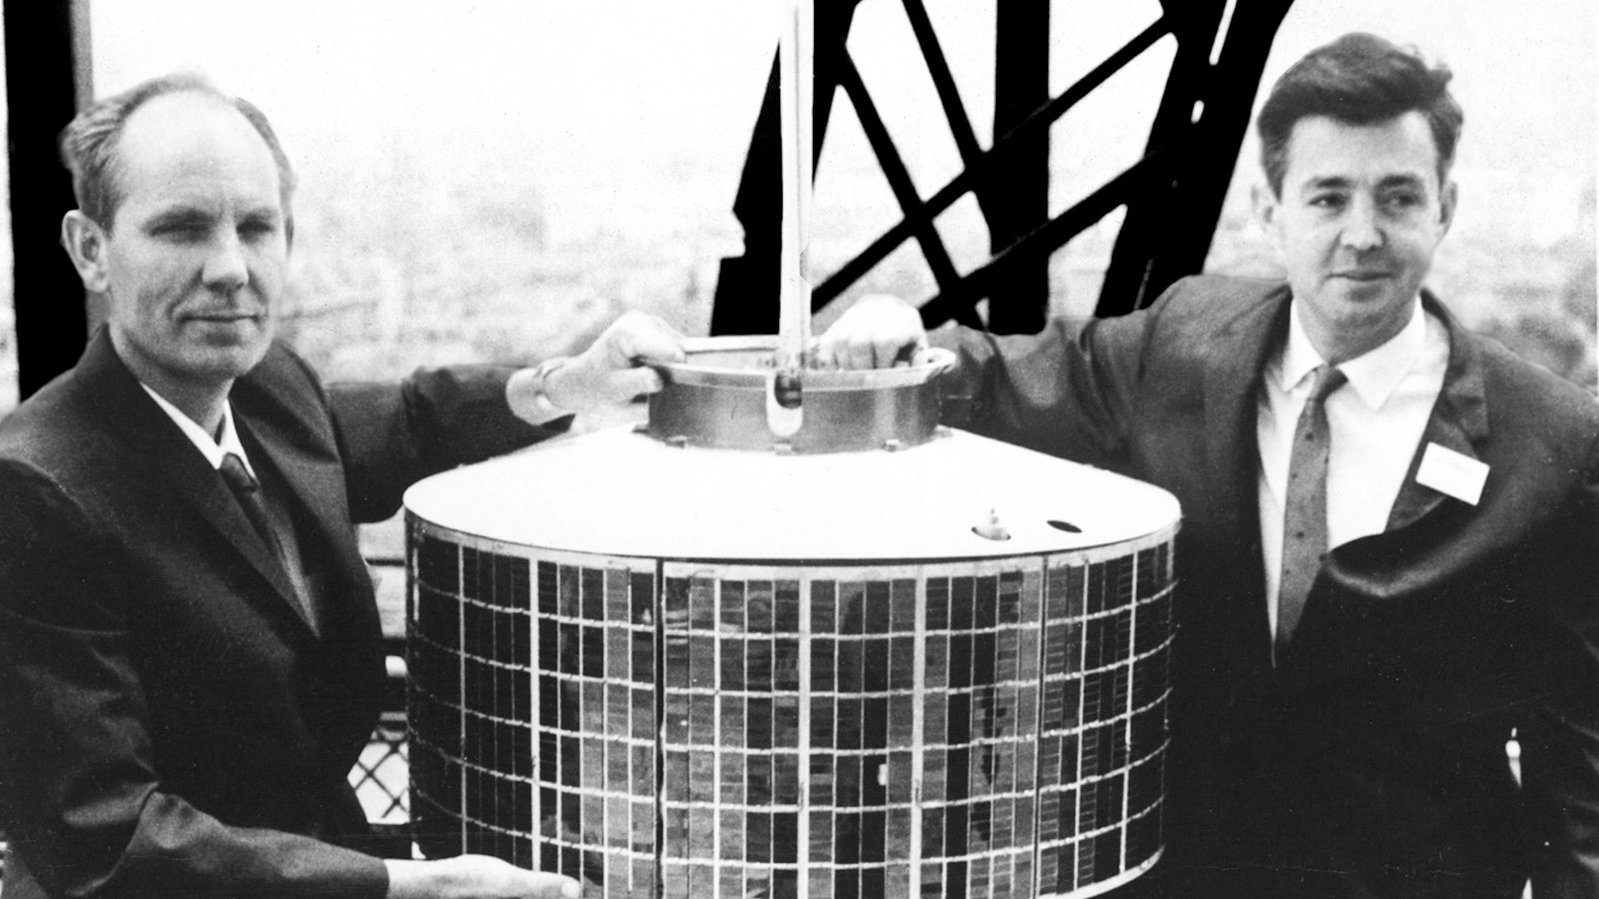 Which Satellite Ushered In The Era Of Live Transatlantic Television Broadcasting?